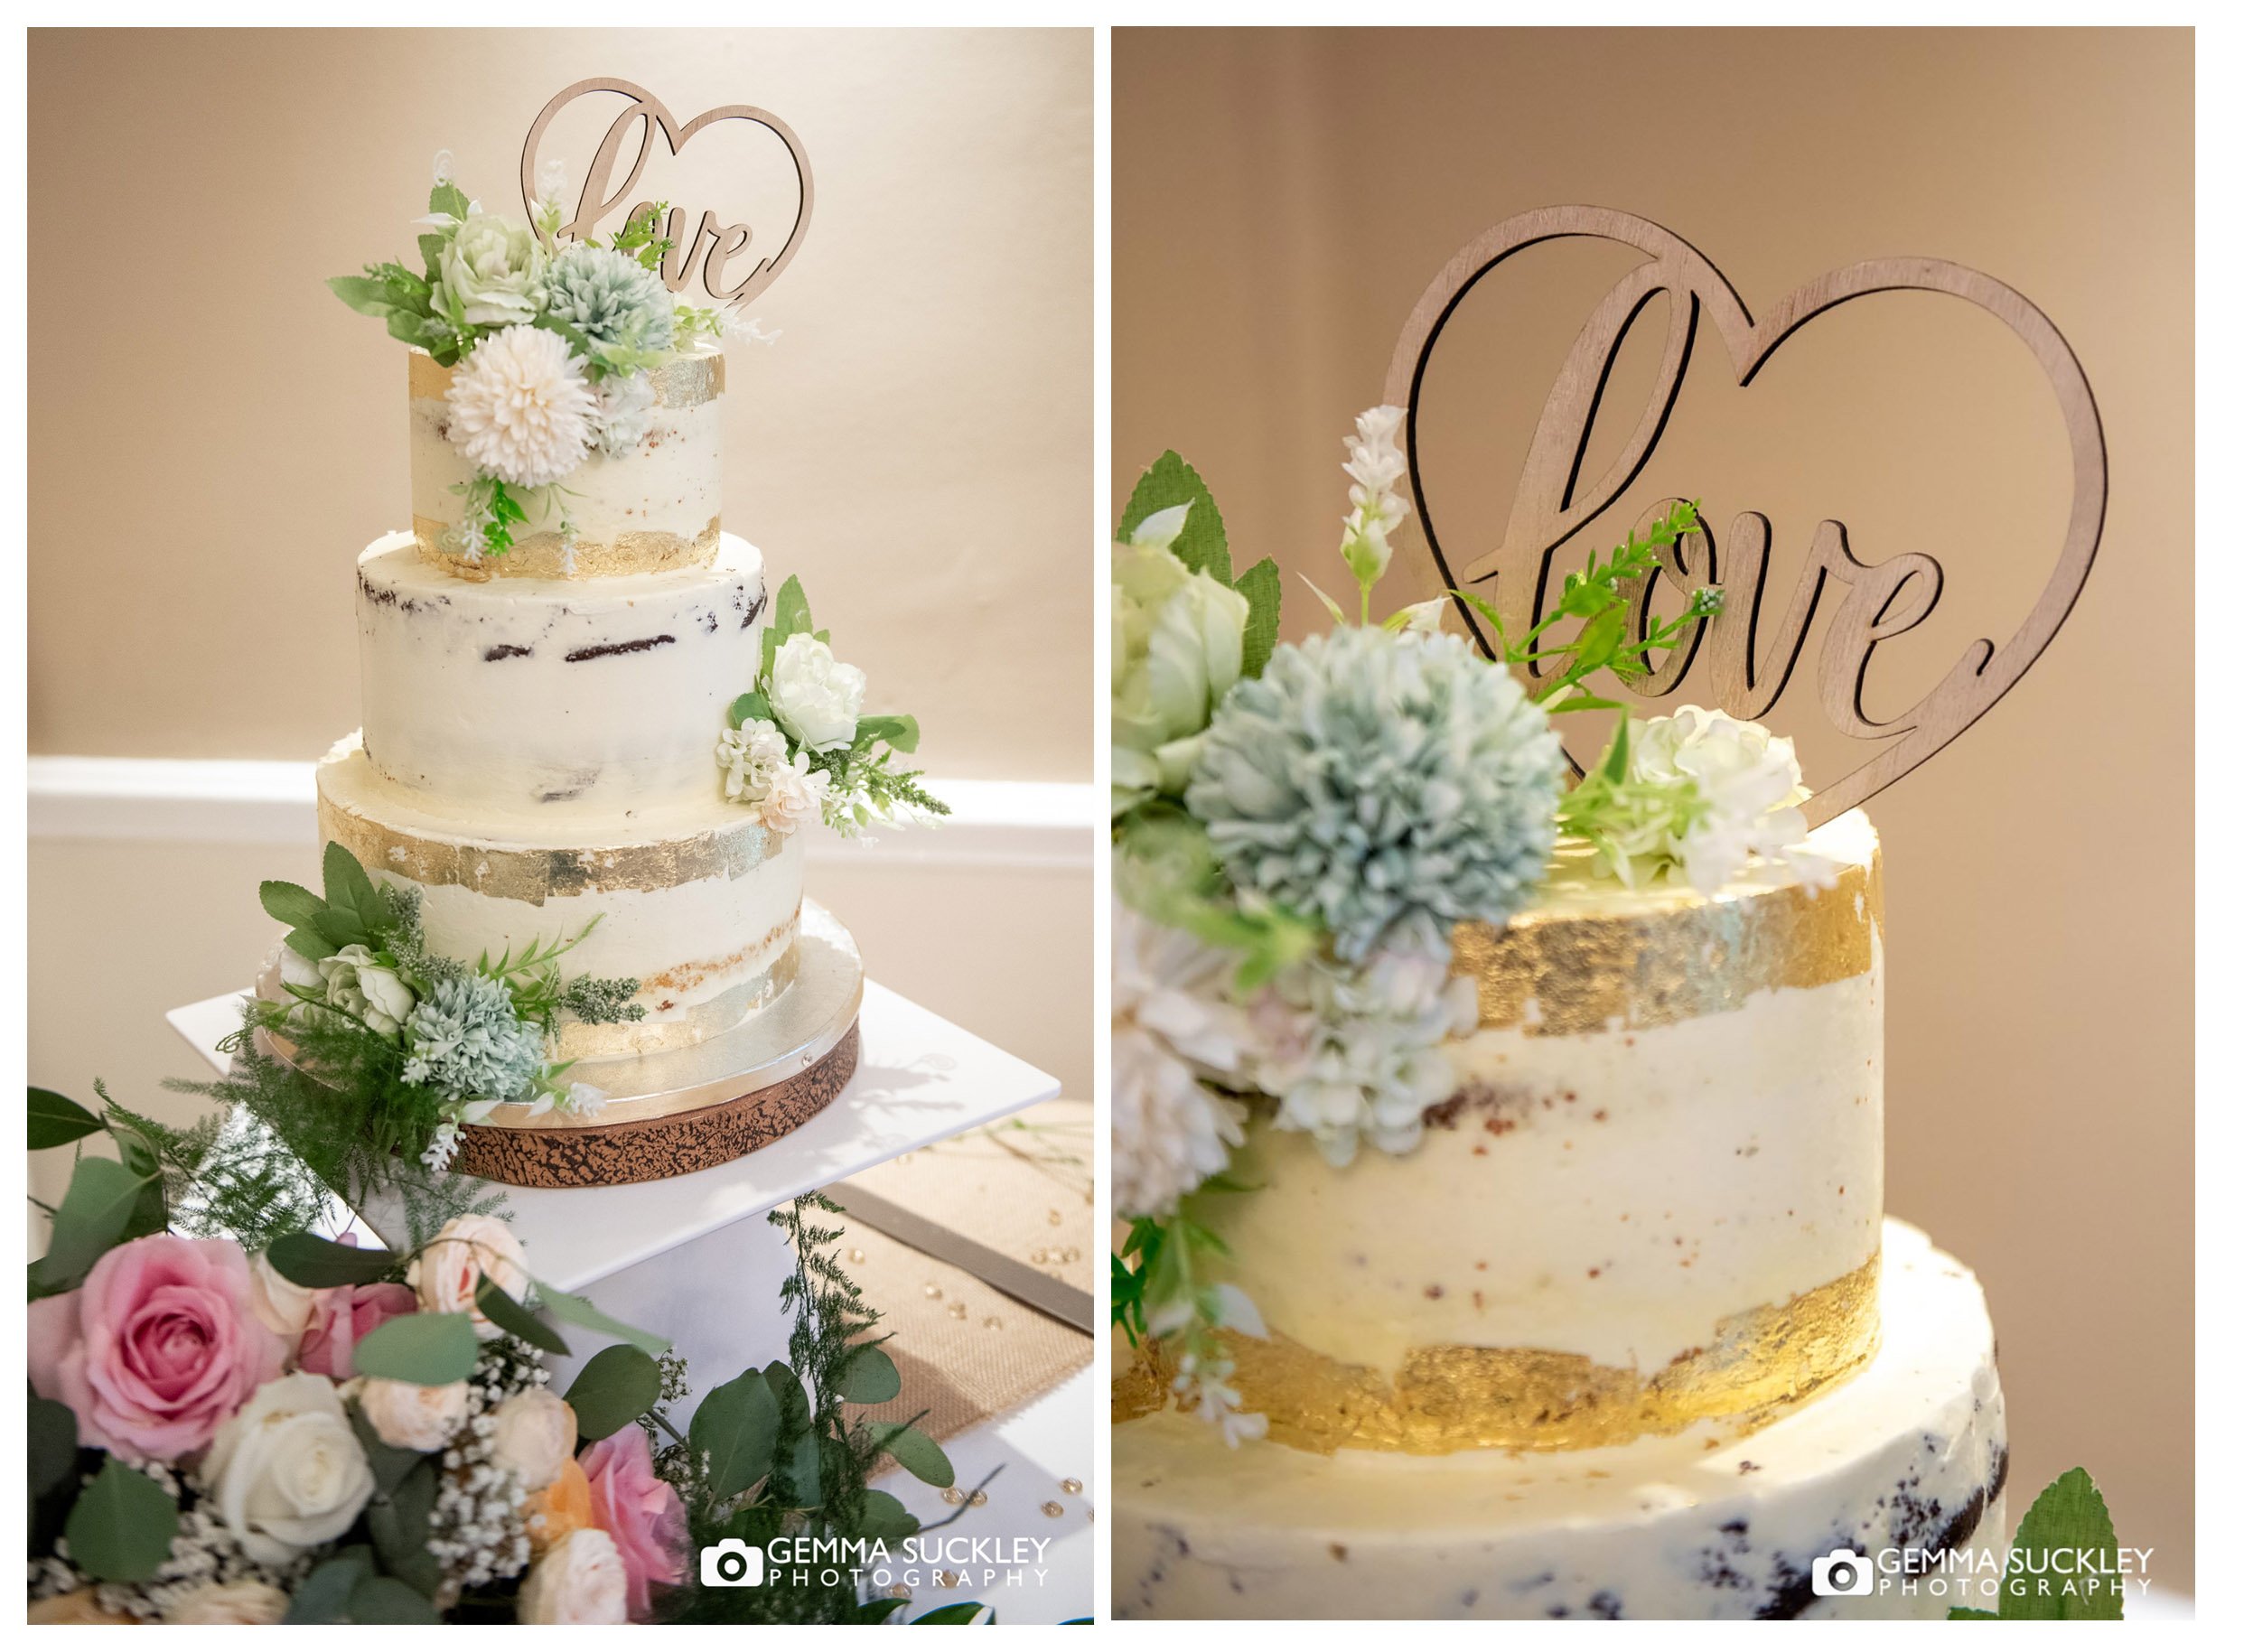 baked wedding cake with gold colouring